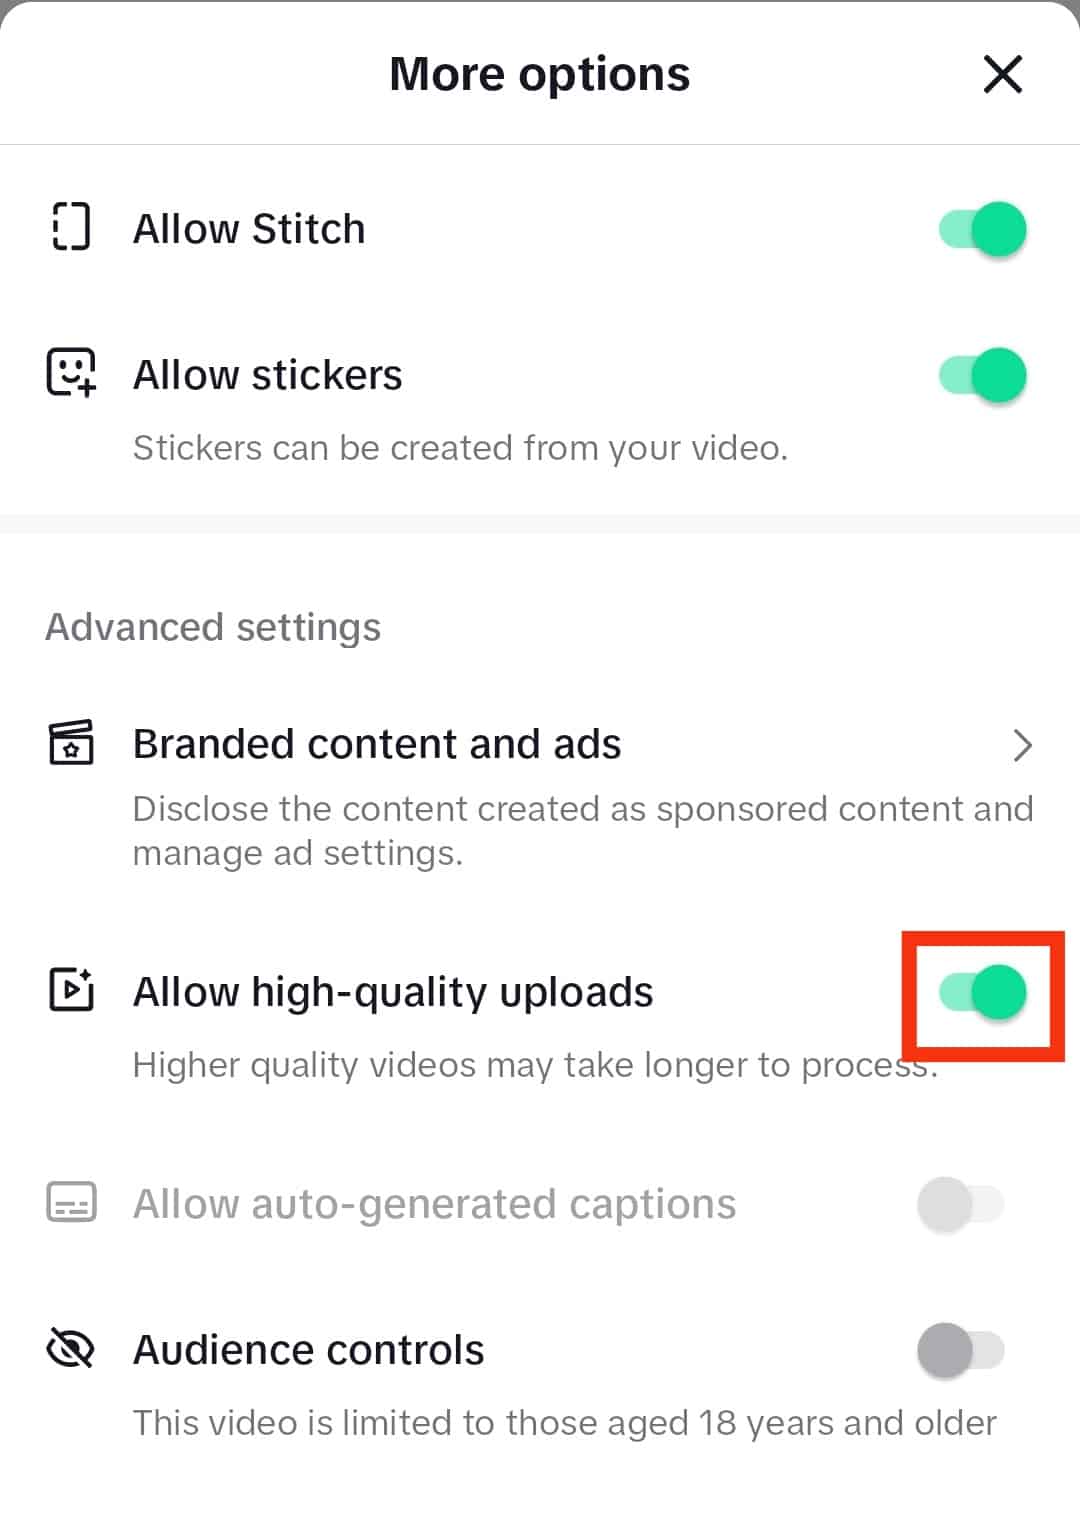 Toggle The Allow High-Quality Uploads Button